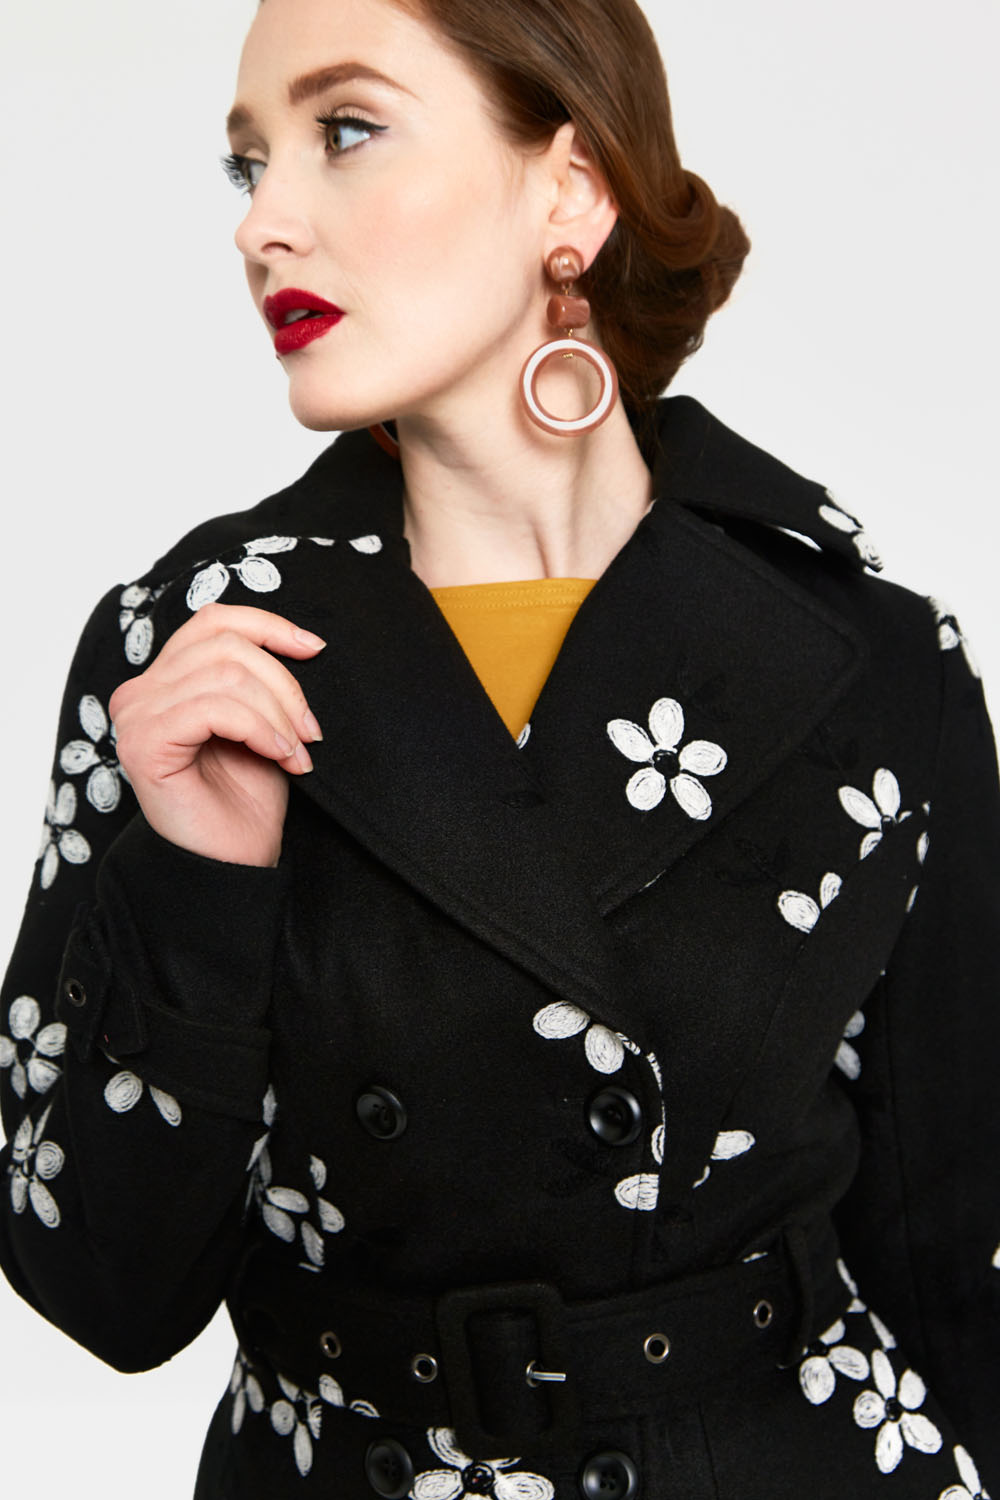 Floral Flocked Double Breasted Coat